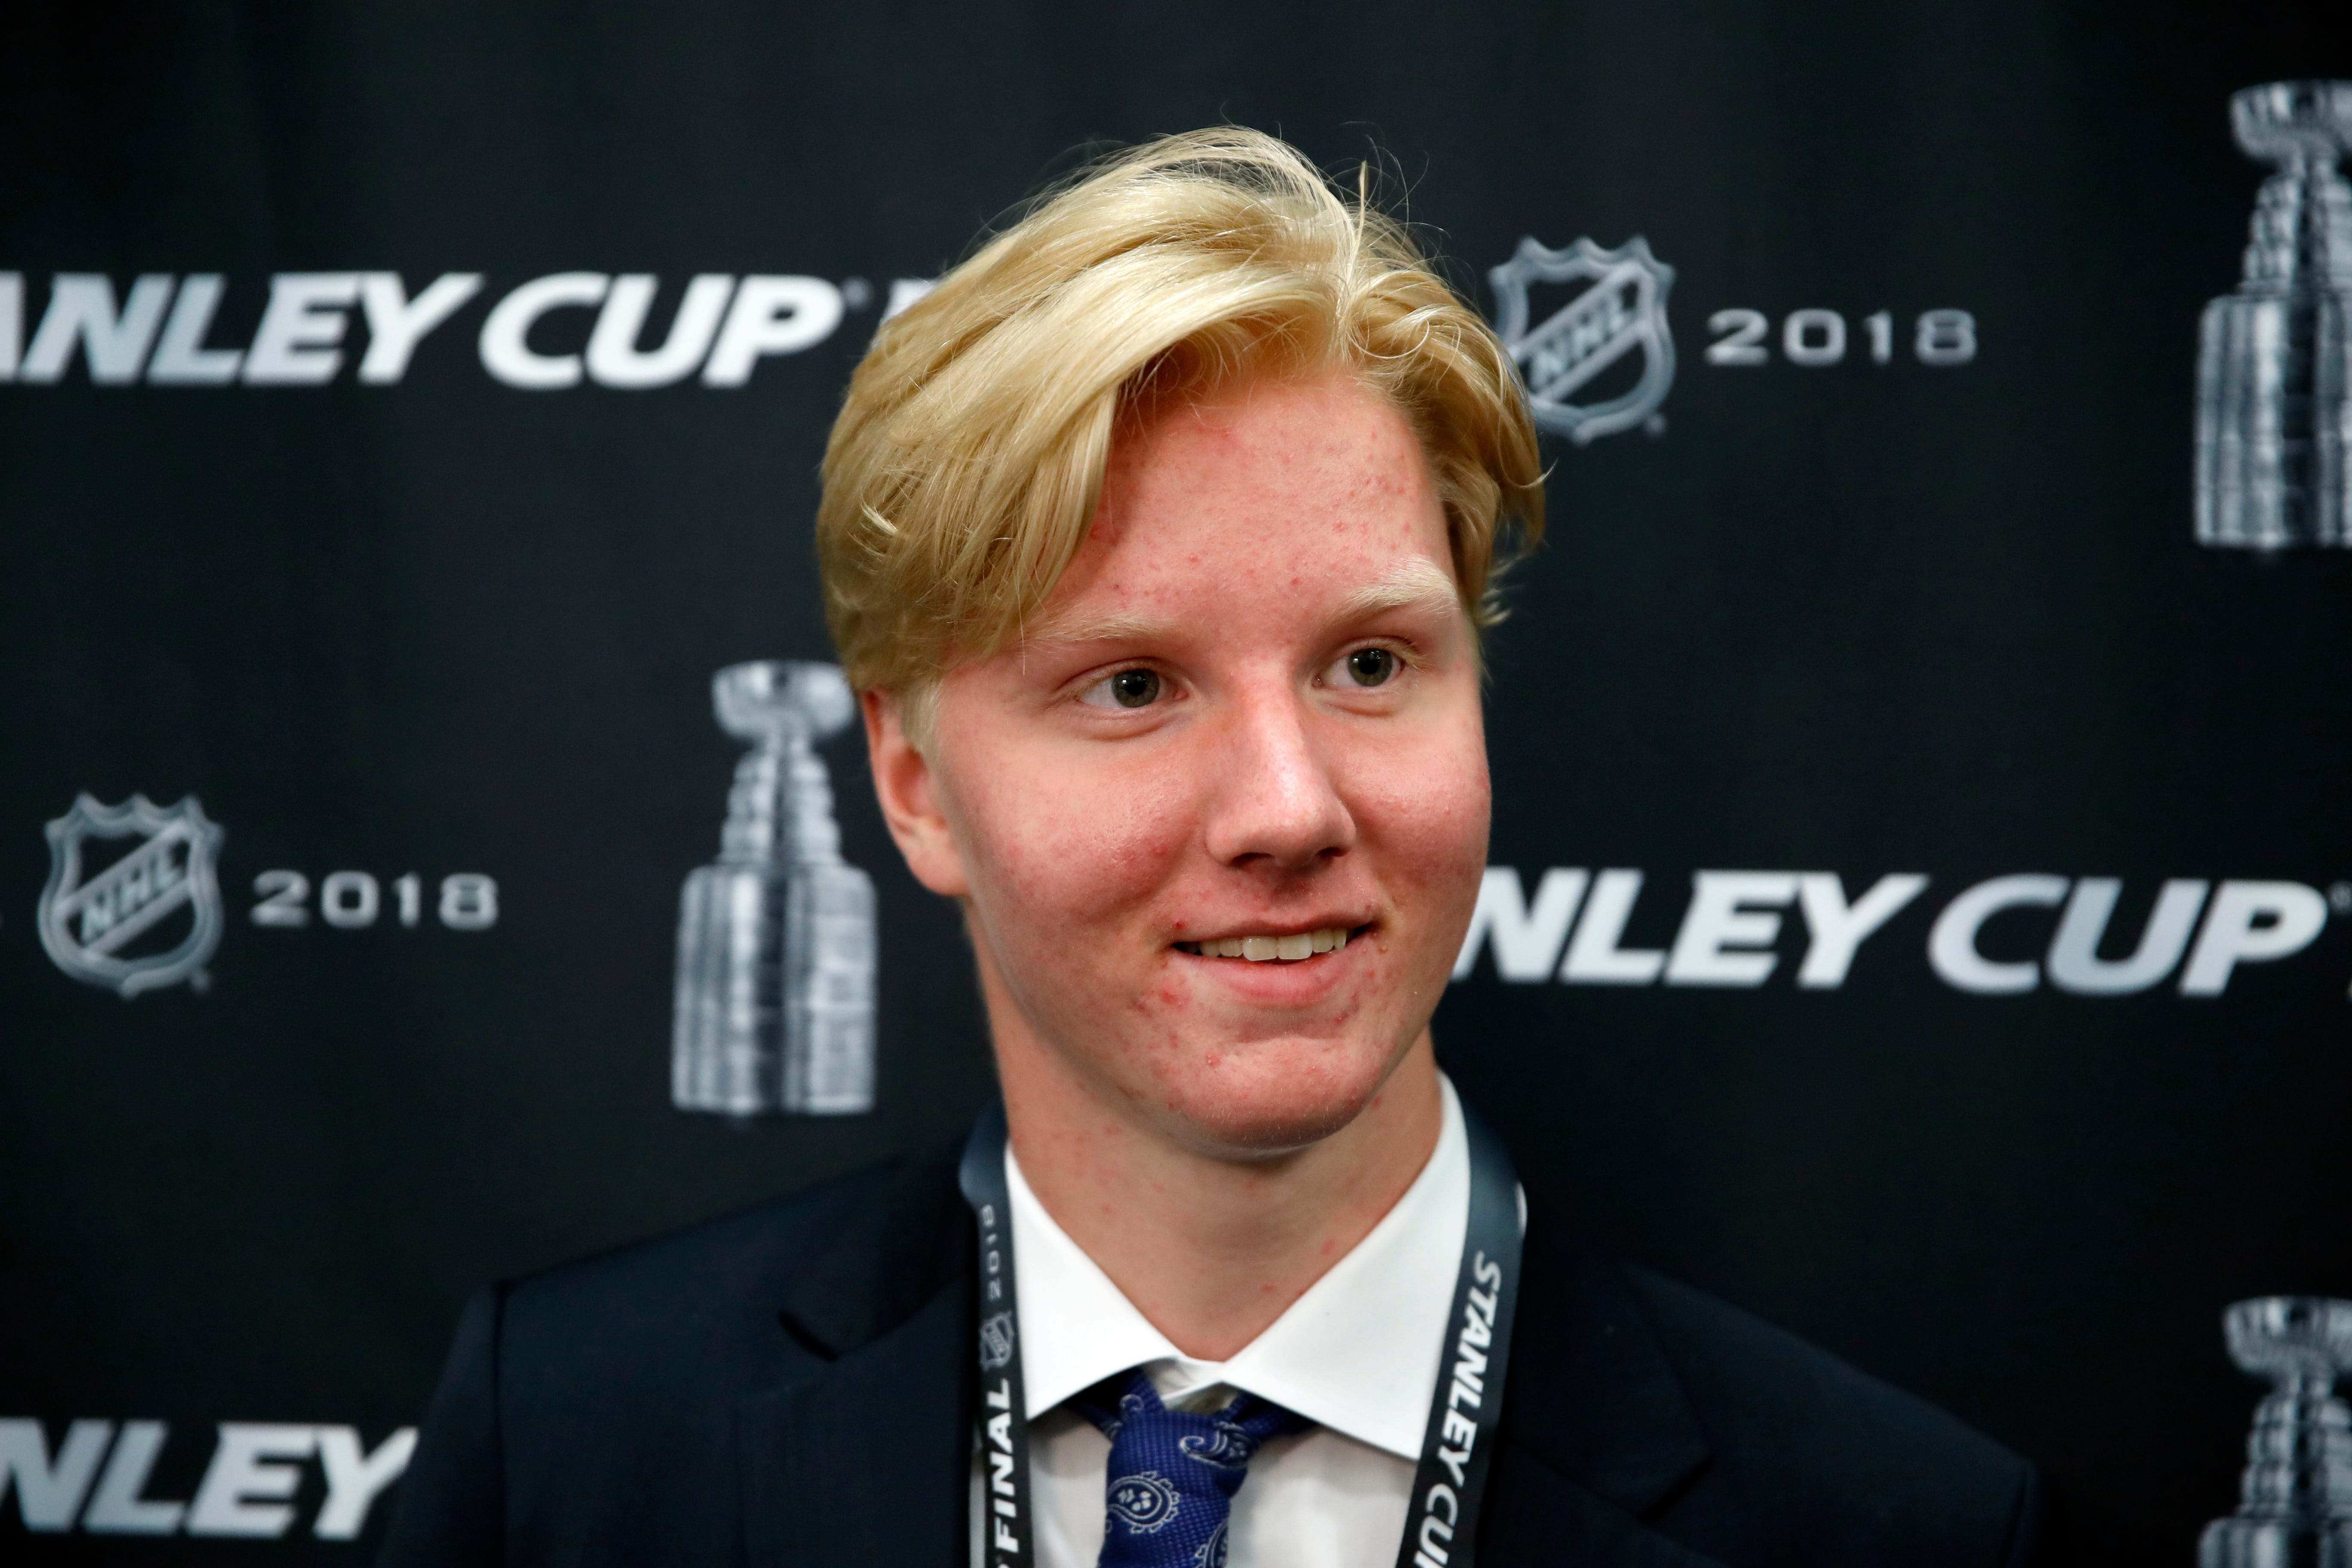 Dahlin ignores the buzz, saying he's not made the Sabres yet